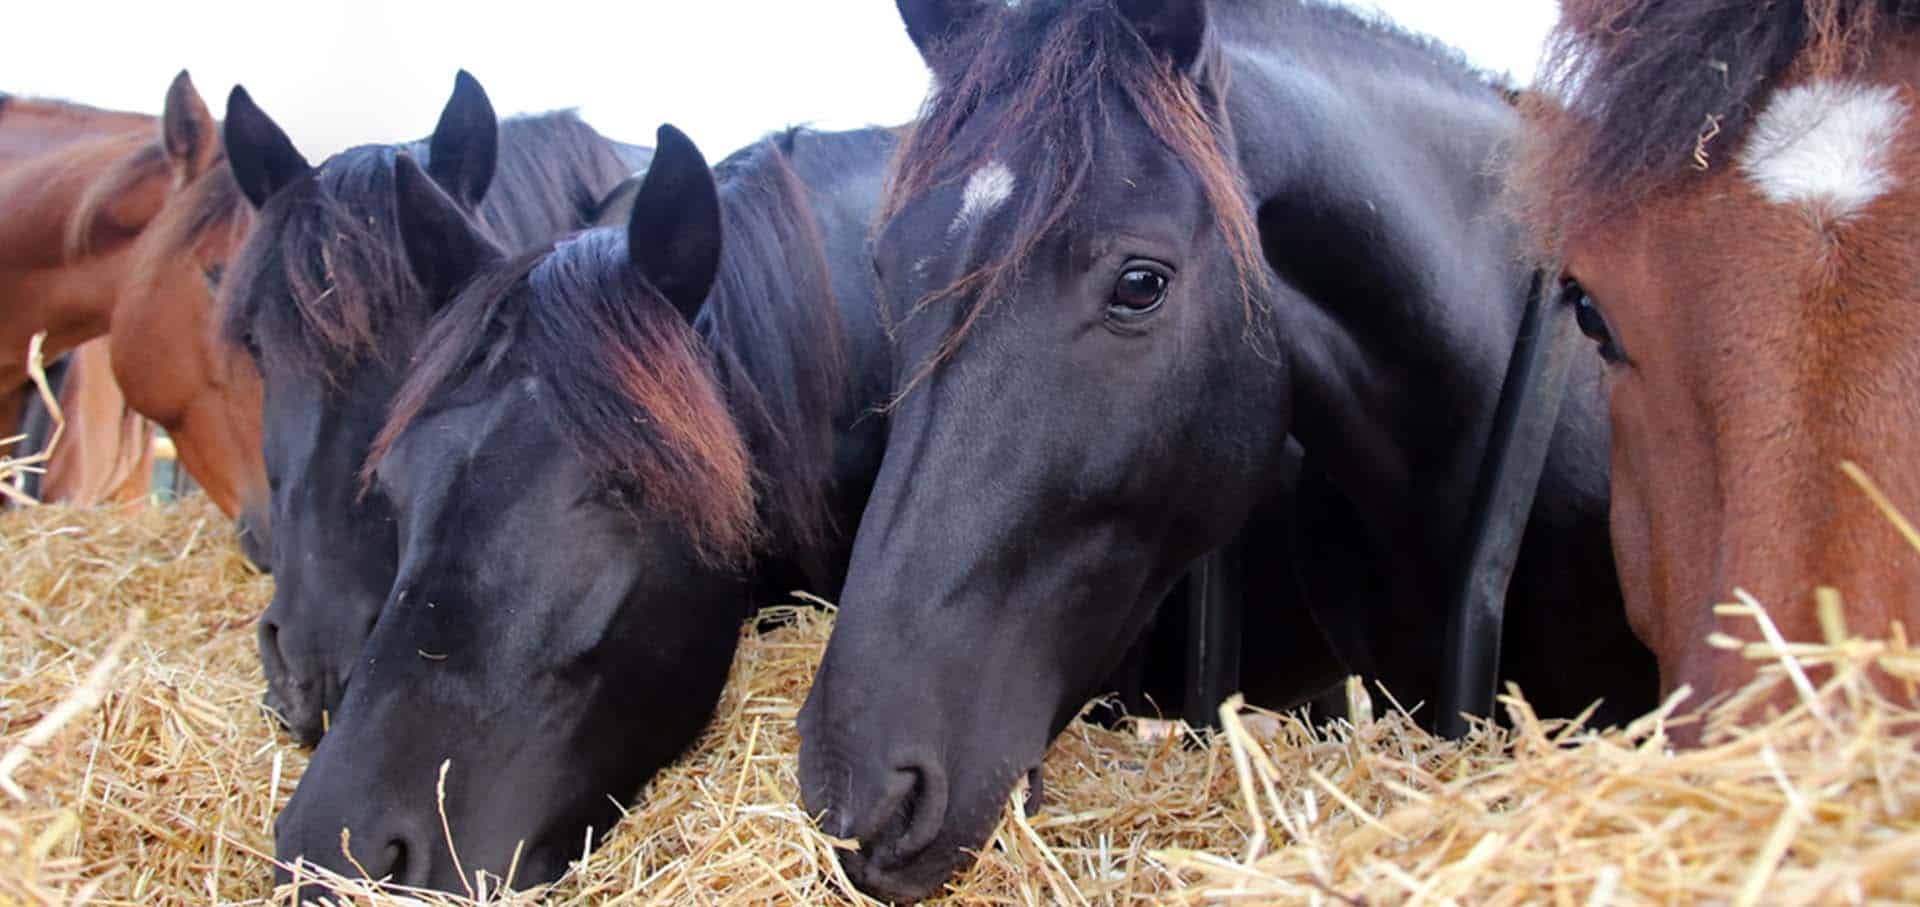 Group of black and brown horses eating grass — Best Veterinary Services in Bundaberg, QLD